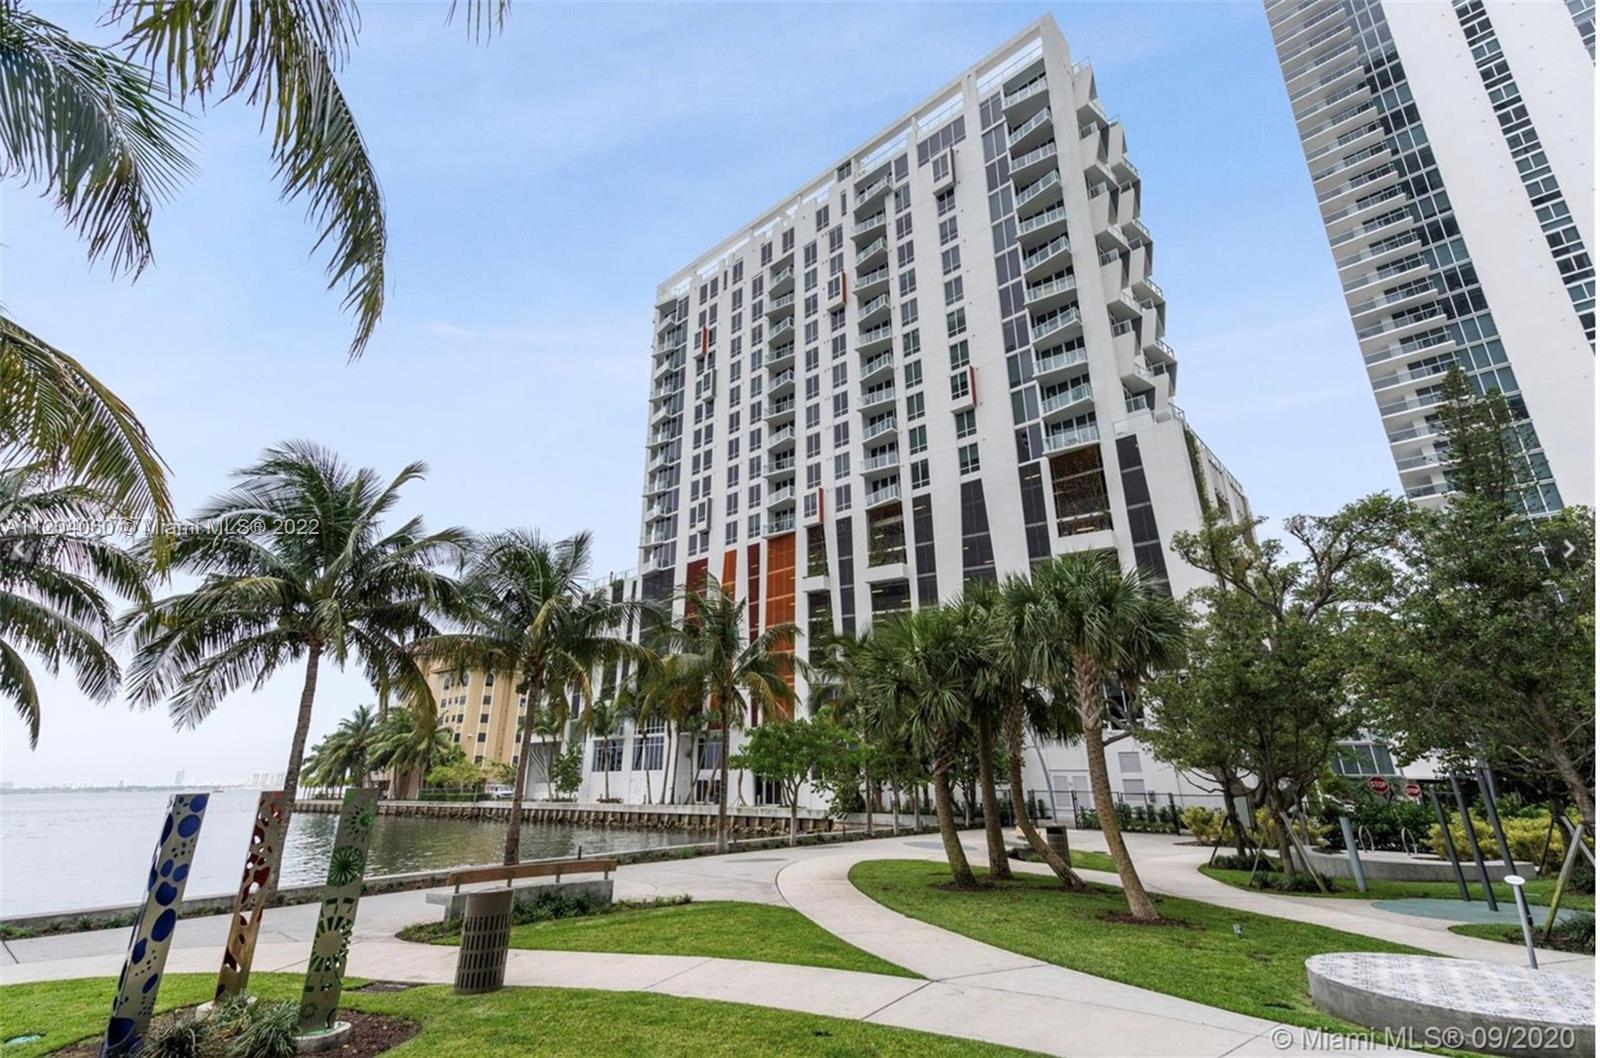 Boutique Building 64 units, 2beds/2baths, at intercostal , Amazing bay views, great amenities, Pool,